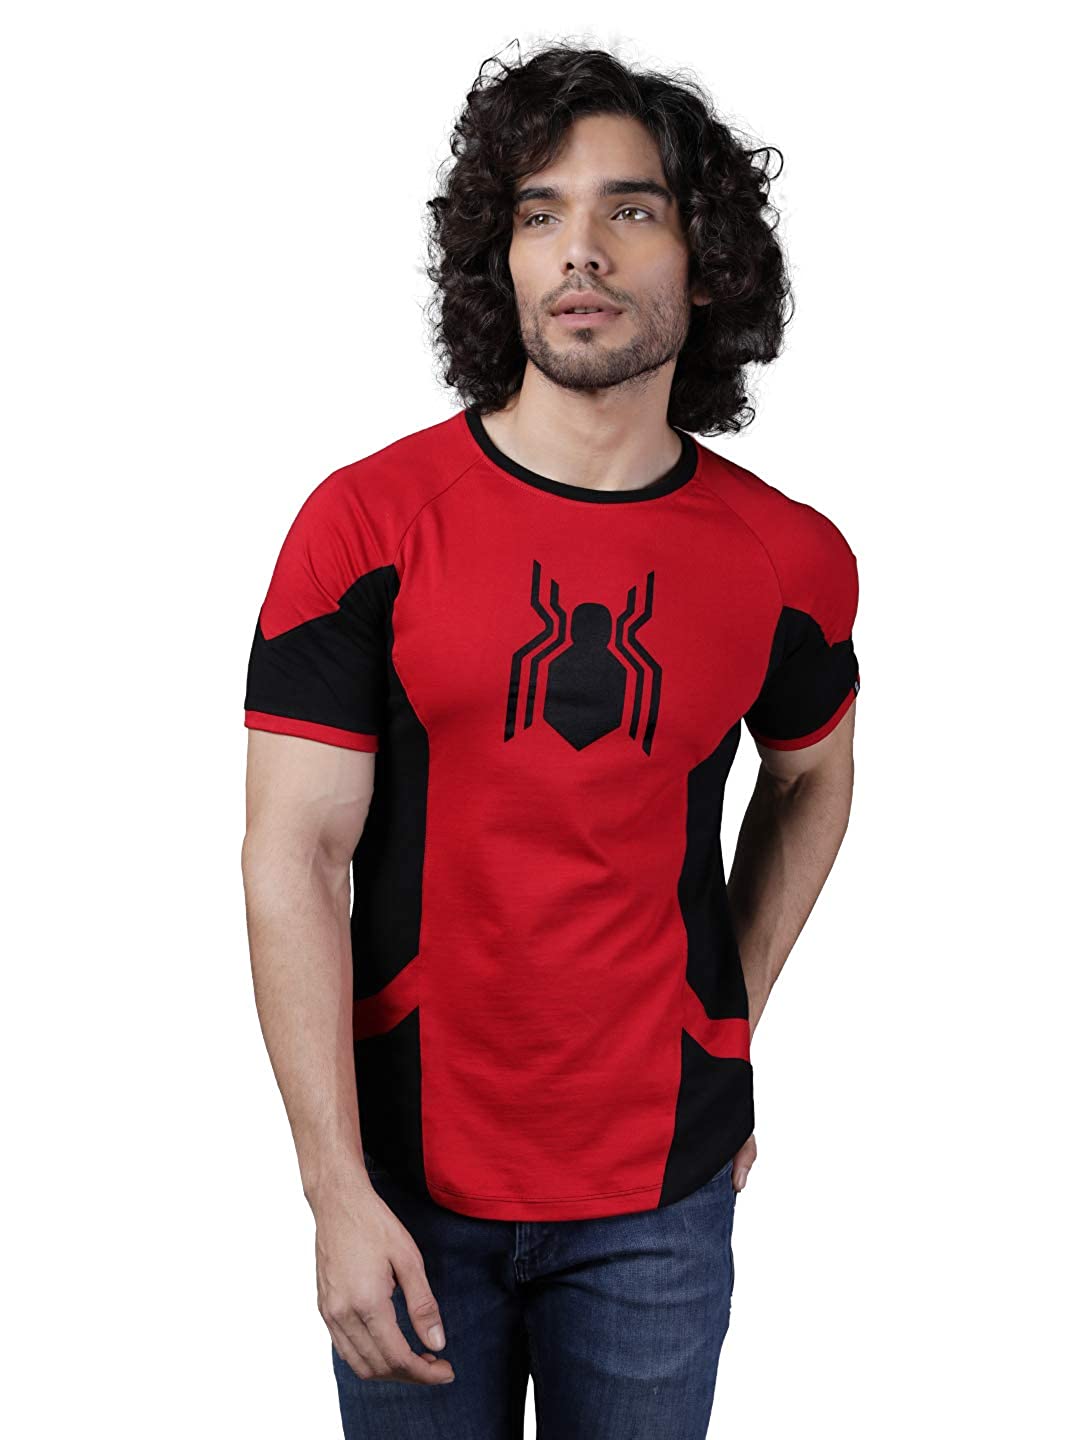 The souled store spider man graphic printed cotton drop cut t-shirt   